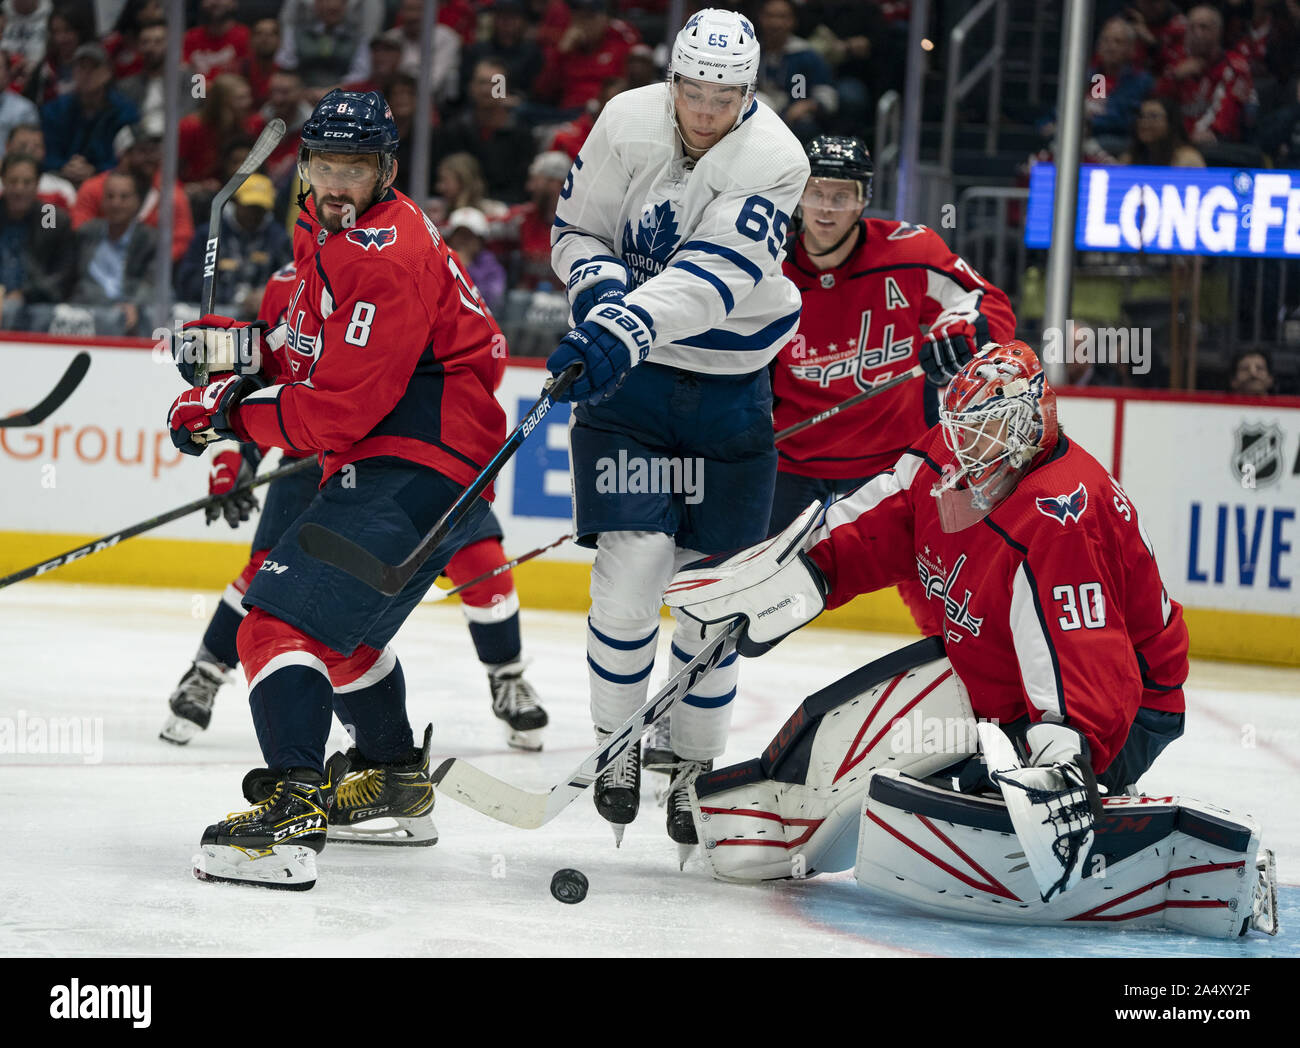 Washington, United States. 16th Oct, 2019. Washington Capitals goaltender Ilya Samsonov (30) attempts a save as Toronto Maple Leafs right wing Ilya Mikheyev (65) deflects a shot while defended by Capitals left wing Alex Ovechkin (8) during the third period at Capital One Arena in Washington, DC on Wednesday, October 16, 2019. The Capitals host the Toronto Maple Leafs to start a 3 game home stand tonight. Photo by Alex Edelman/UPI Credit: UPI/Alamy Live News Stock Photo